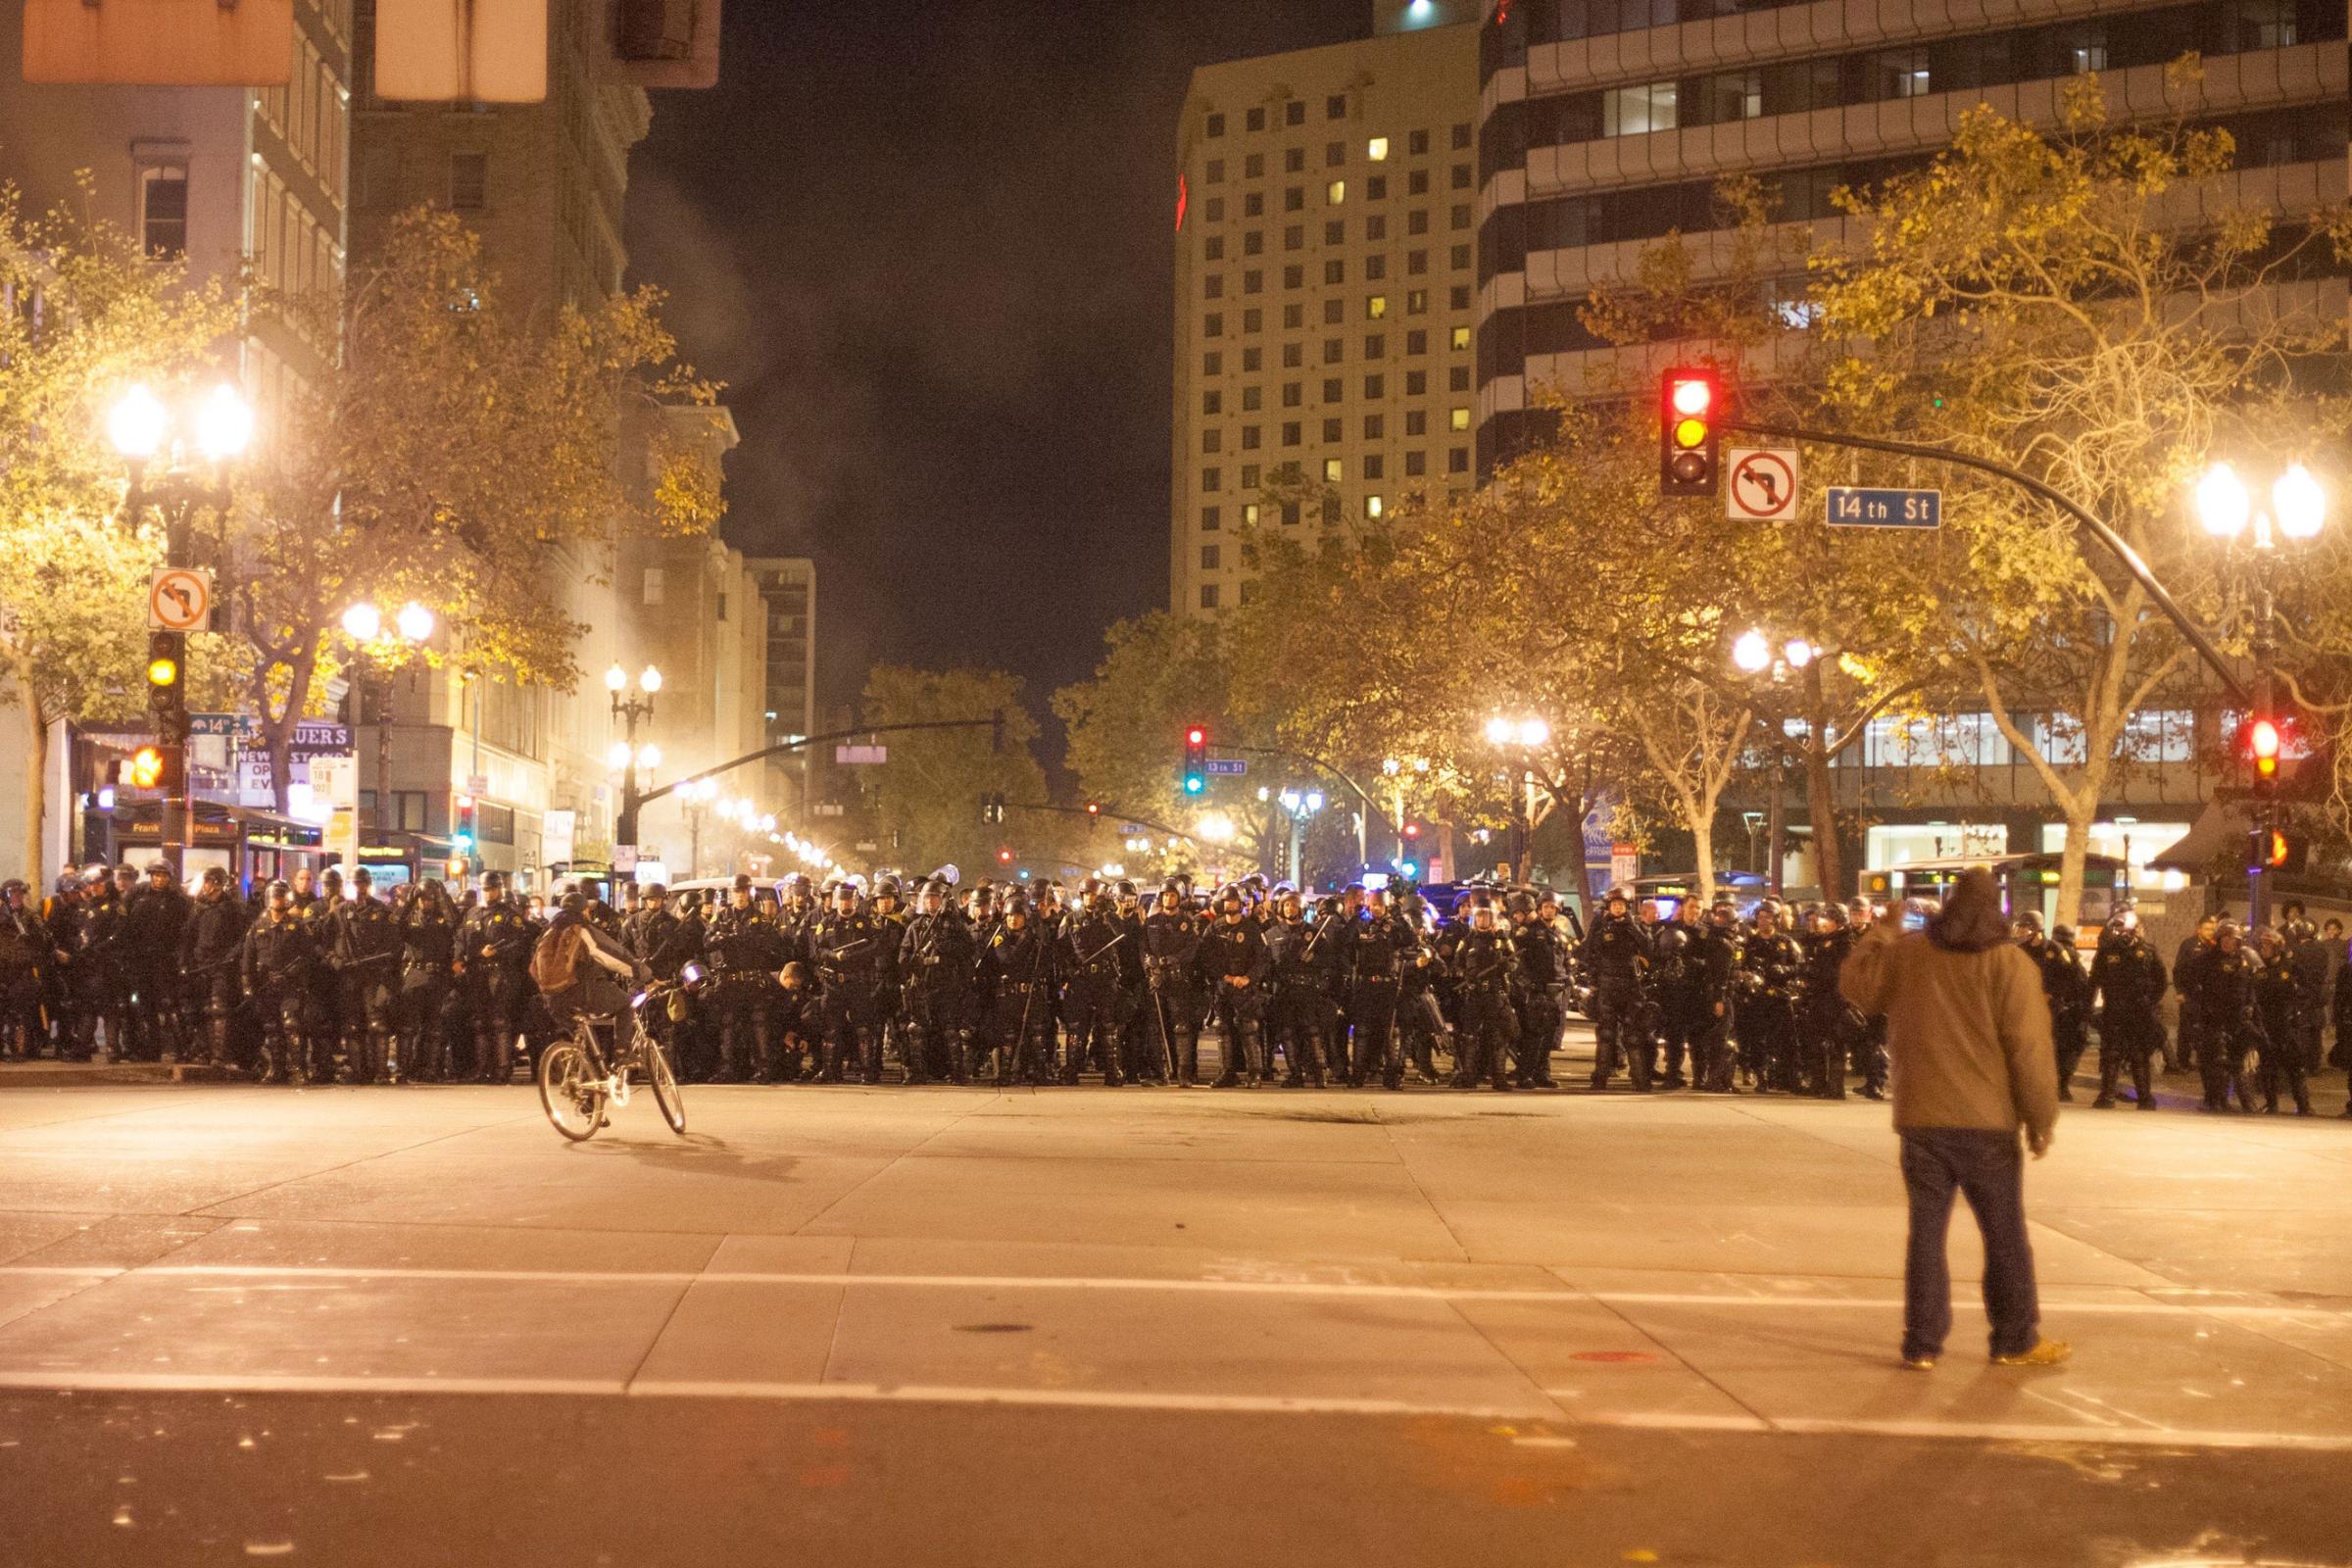 A protestor on a bike rides in front of a crowd of police officers in full riot gear in Oakland, Calif., on Nov. 25, 2014.